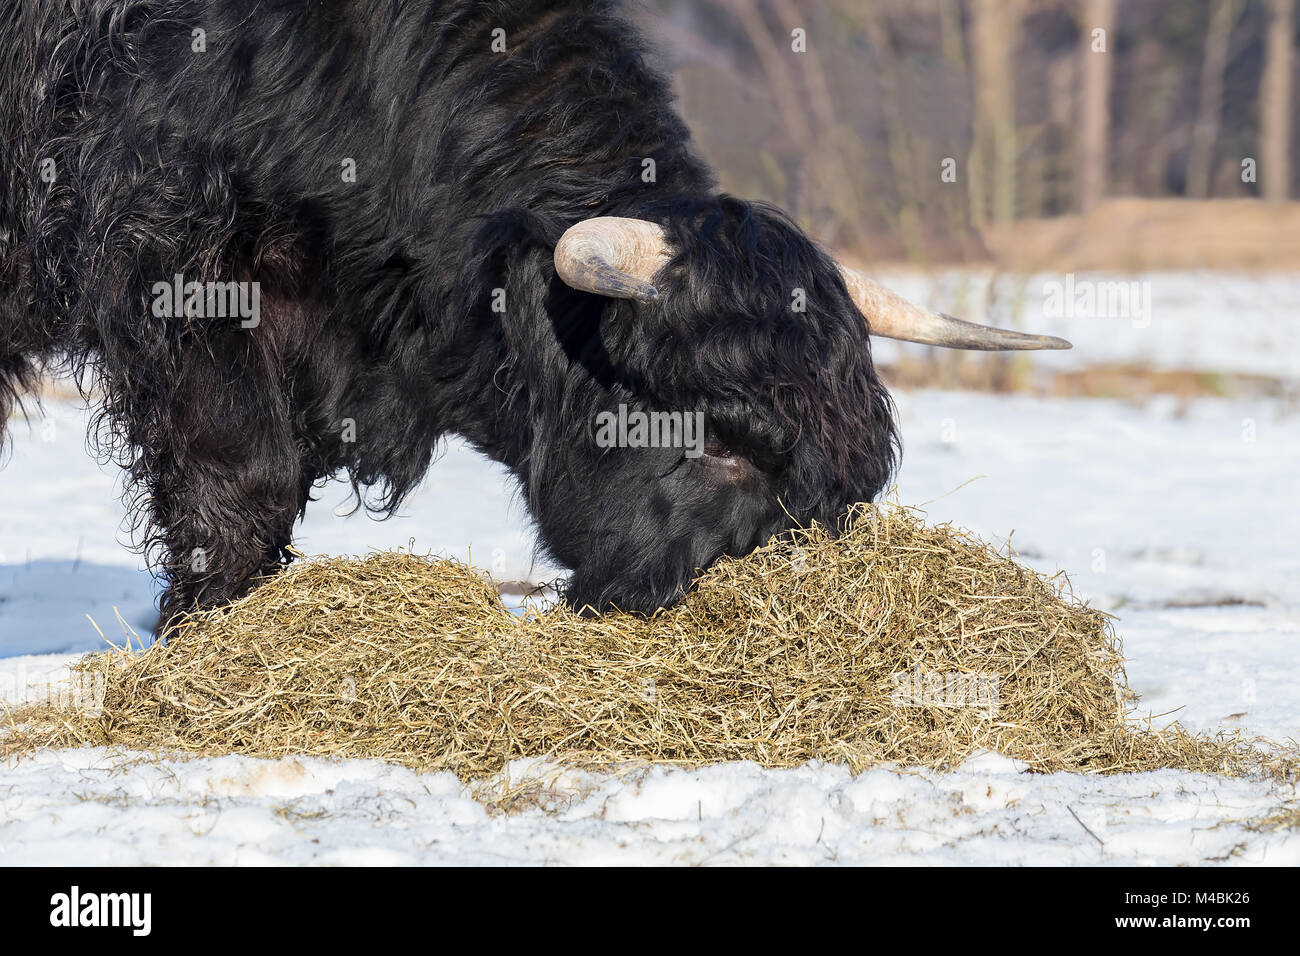 Scottish highlander cow eating hay in winter snow Stock Photo